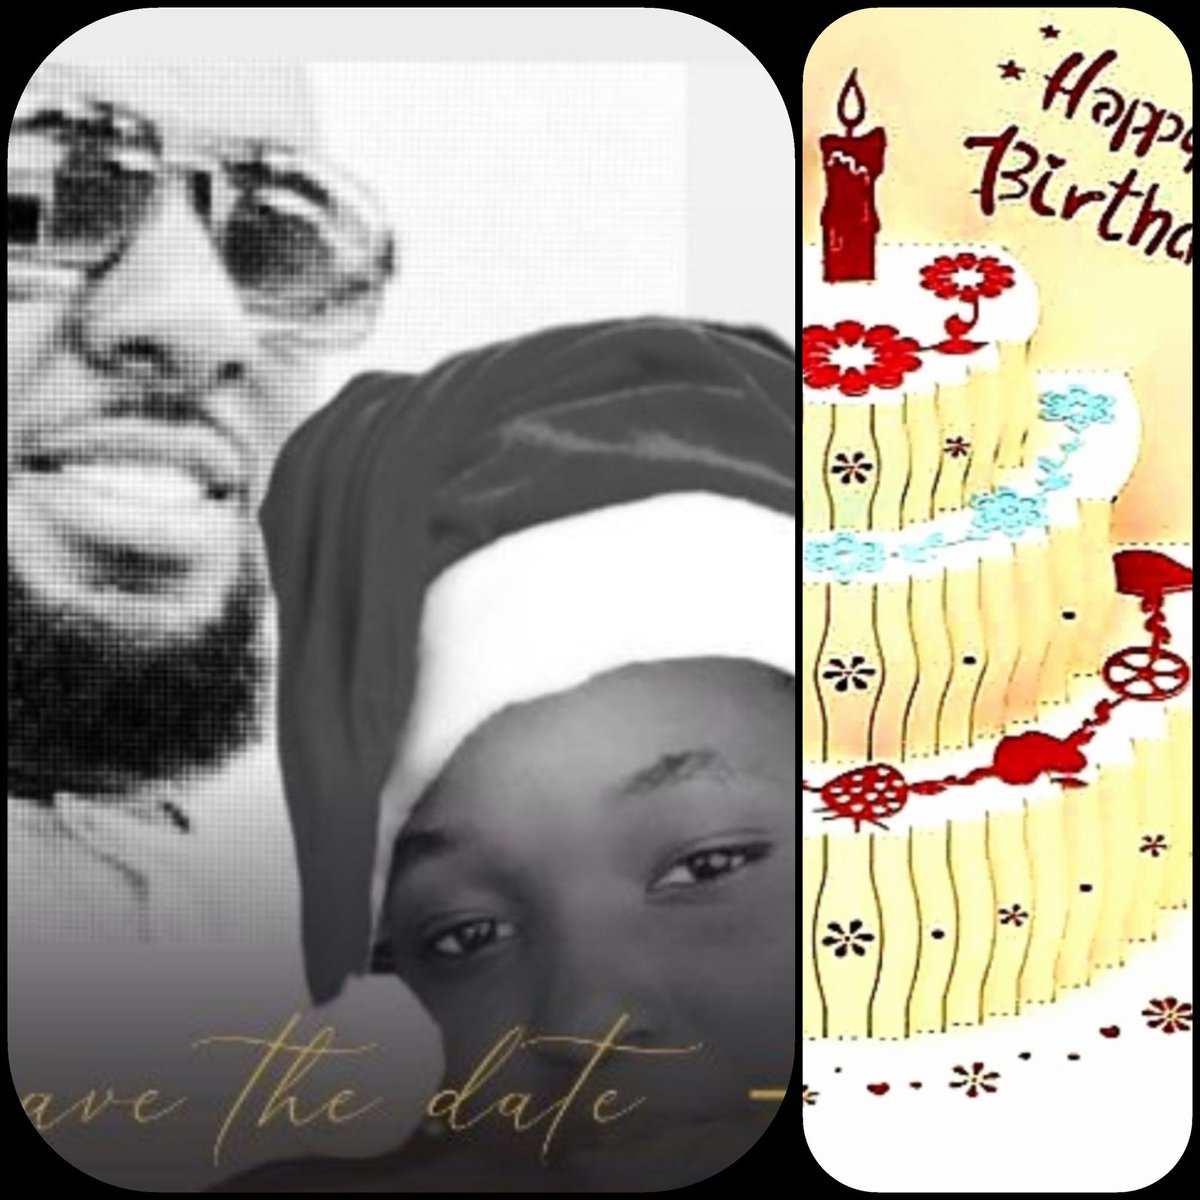 Happiest Birthday to you brother/sister @ntarungu2 🎊 
[Rwf30k-Birthdaycake] is delivered to you🎂 
PLEASE, DM your momo to Queen Chap her majesty for delivery✔
Have a blast and enjoy your day🎊
 Thank you for being a fan of the 🏰Kingdom🤗😂 we appreciate you!